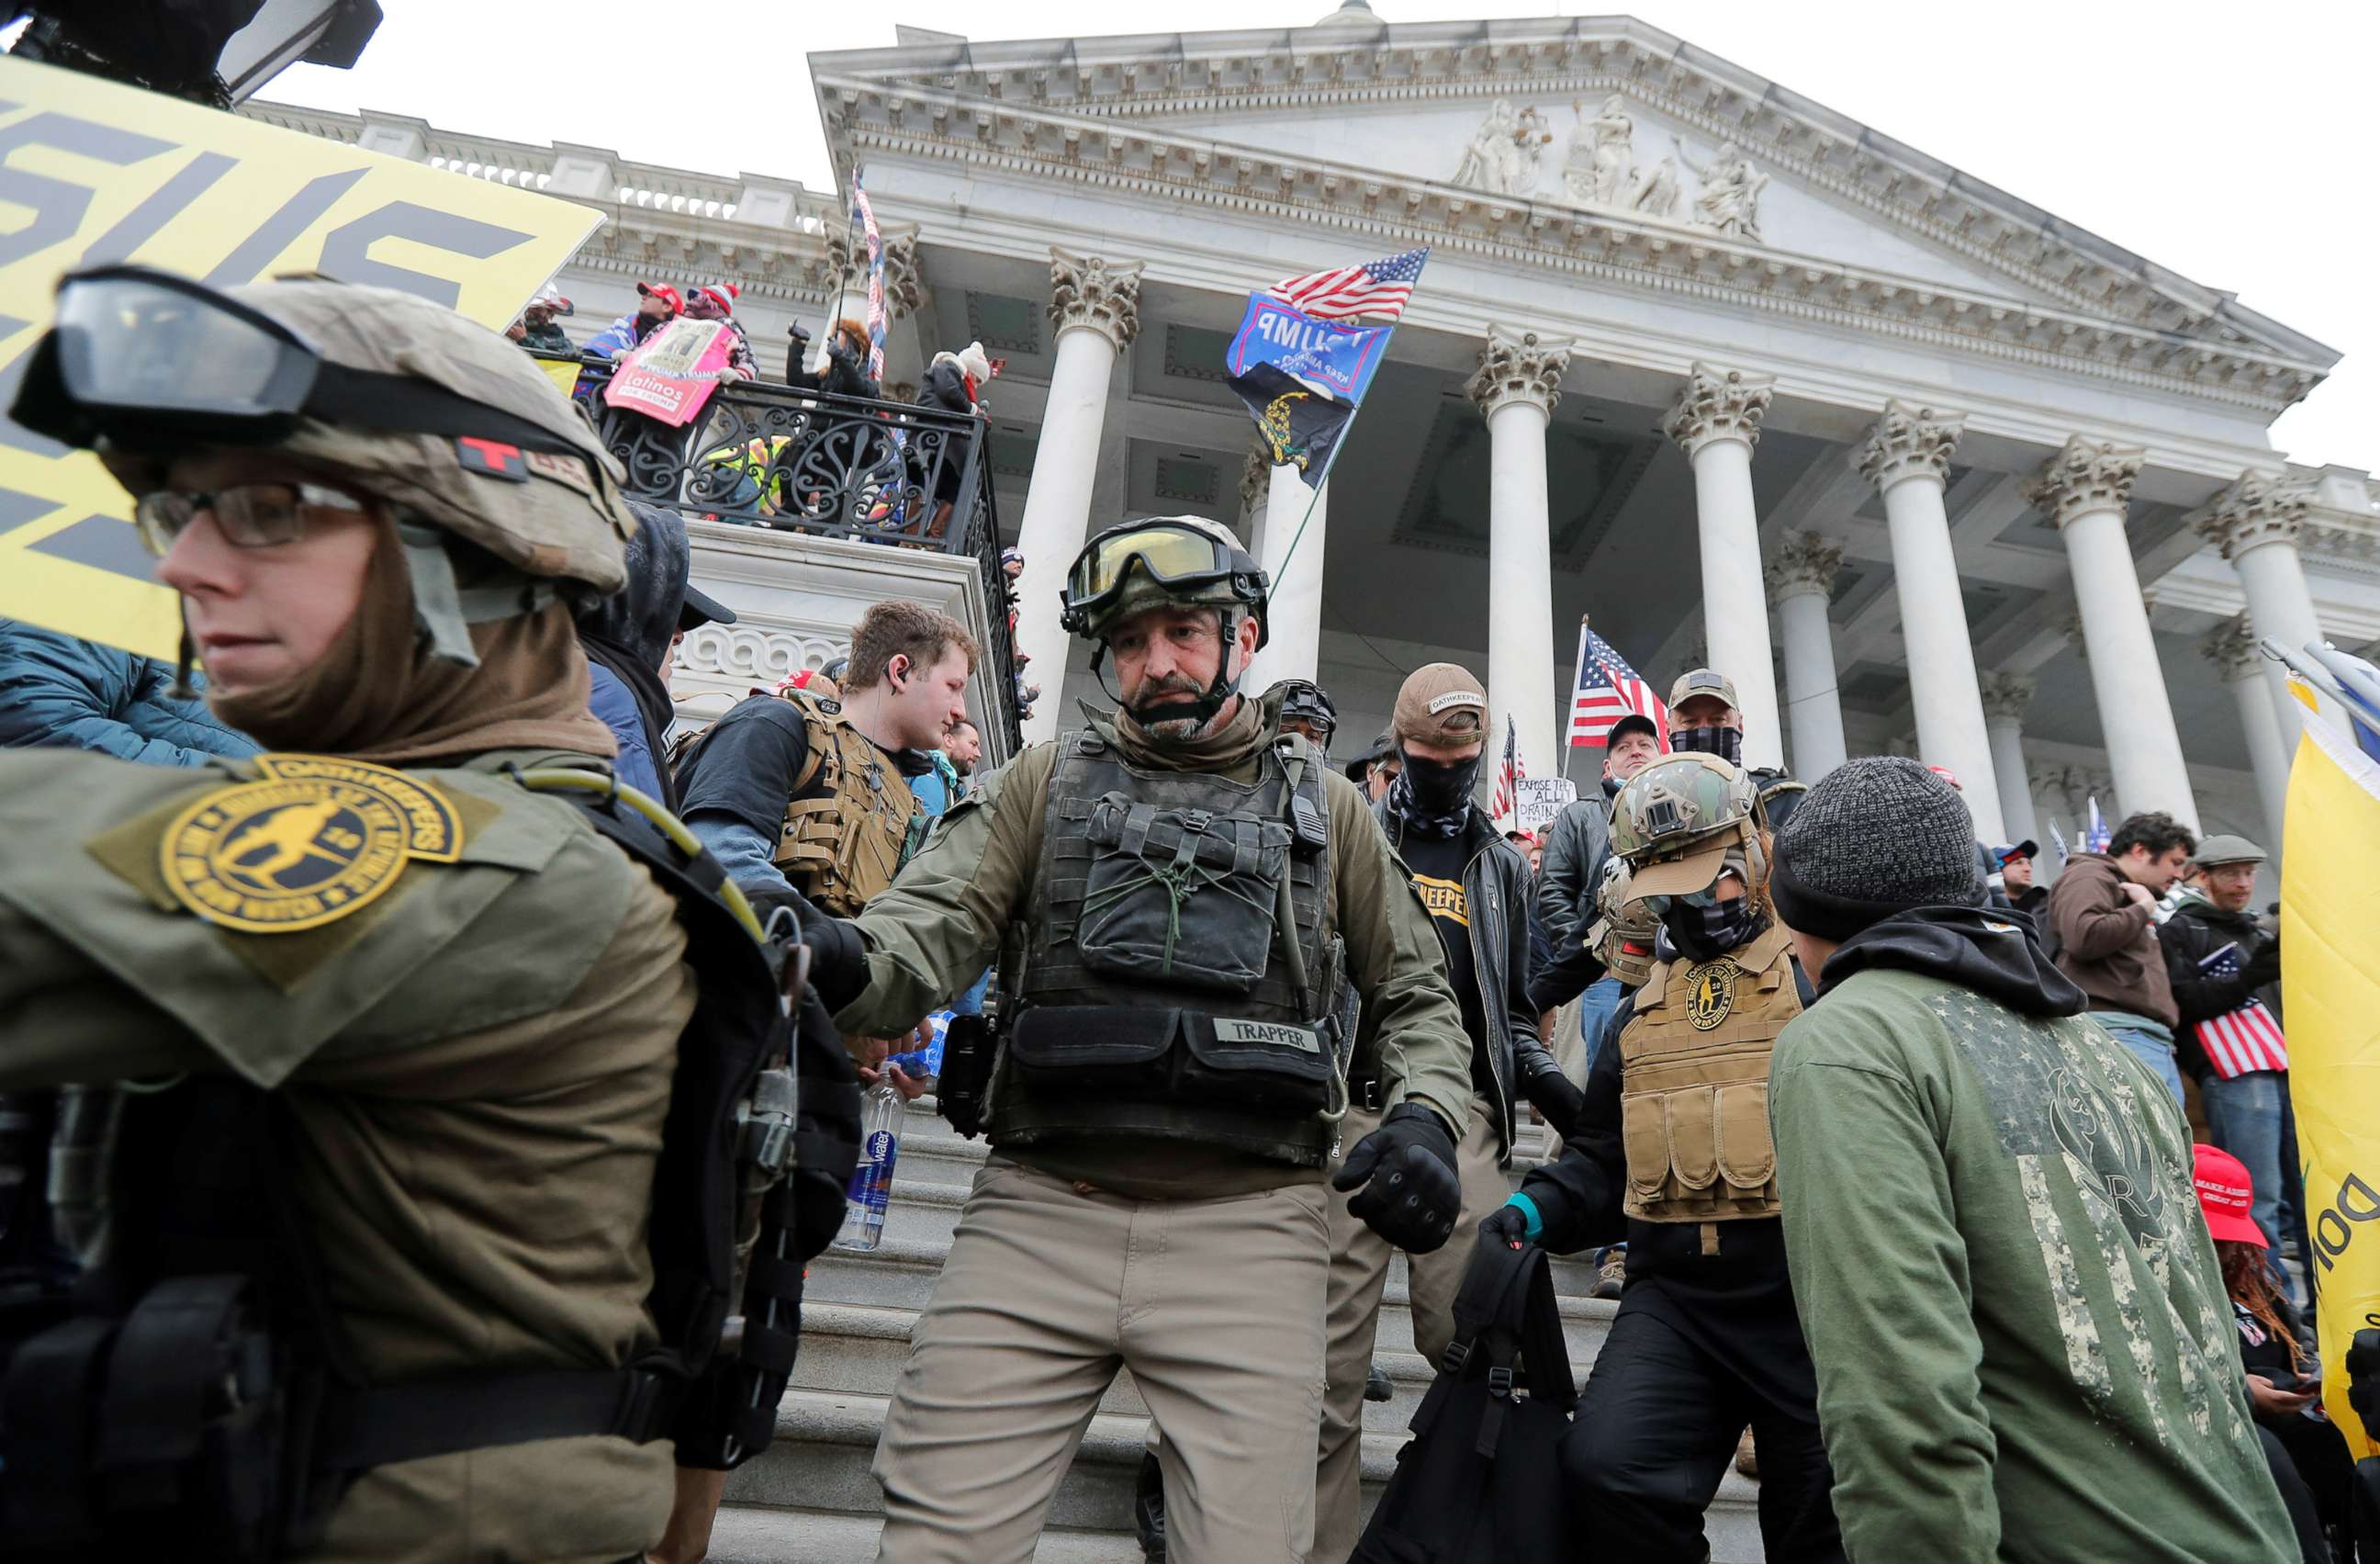 PHOTO: Jessica Marie Watkins, left, and Donovan Ray Crowl, center, both from Ohio, march down the East front steps of the U.S. Capitol with the Oath Keepers militia group in Washington, Jan. 6 2021.